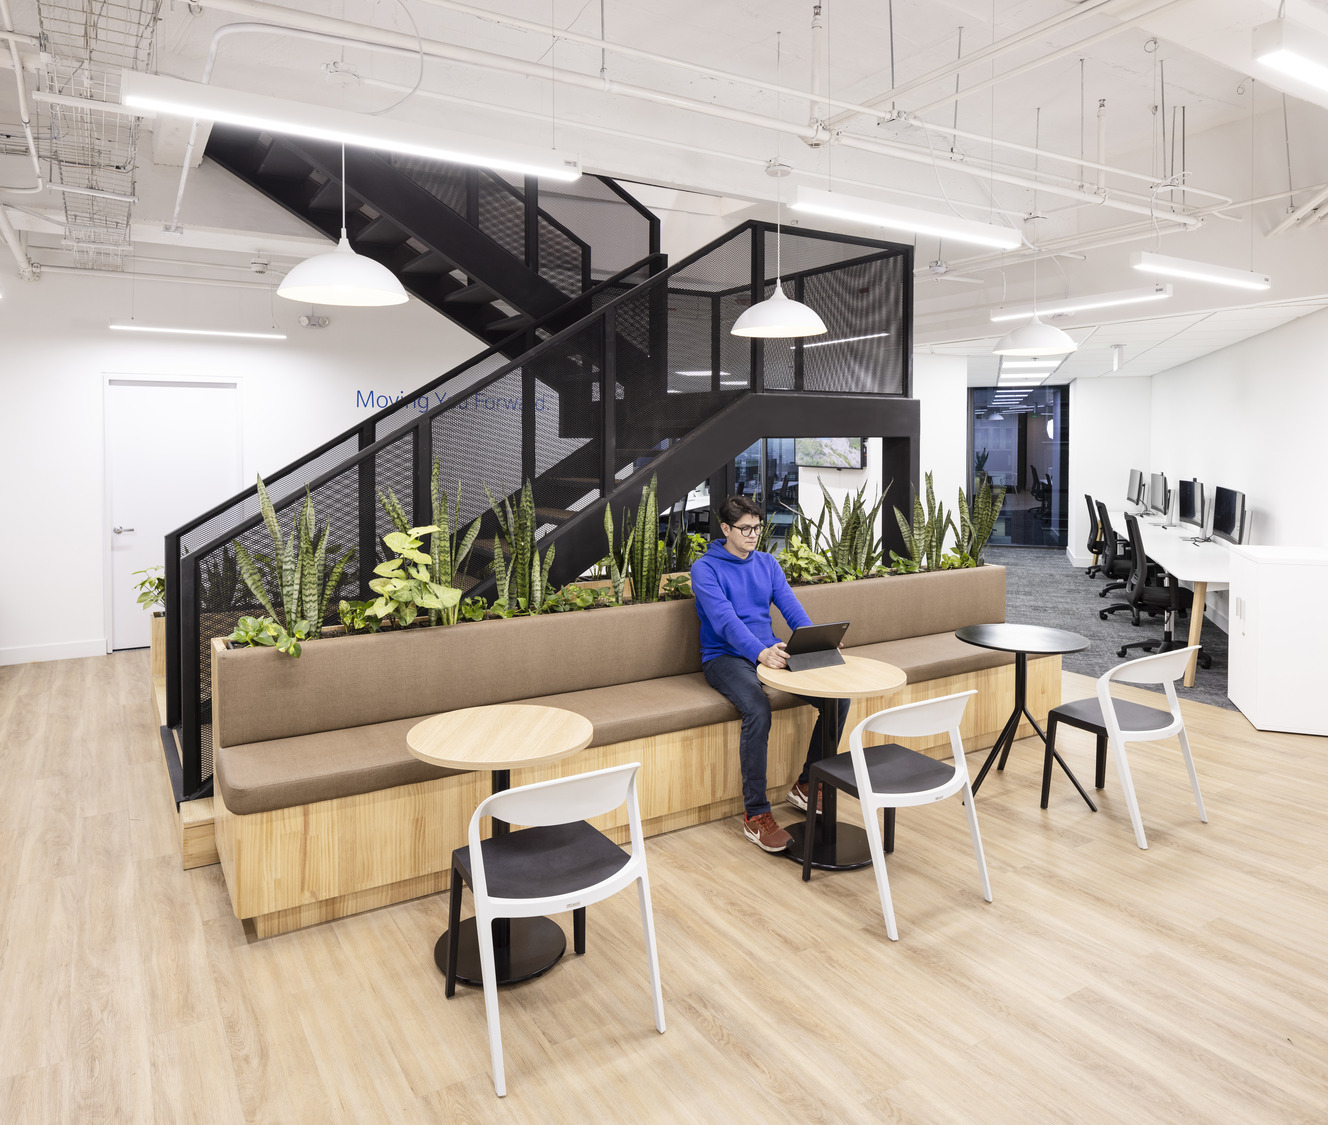 Global medical device company work space by stairs